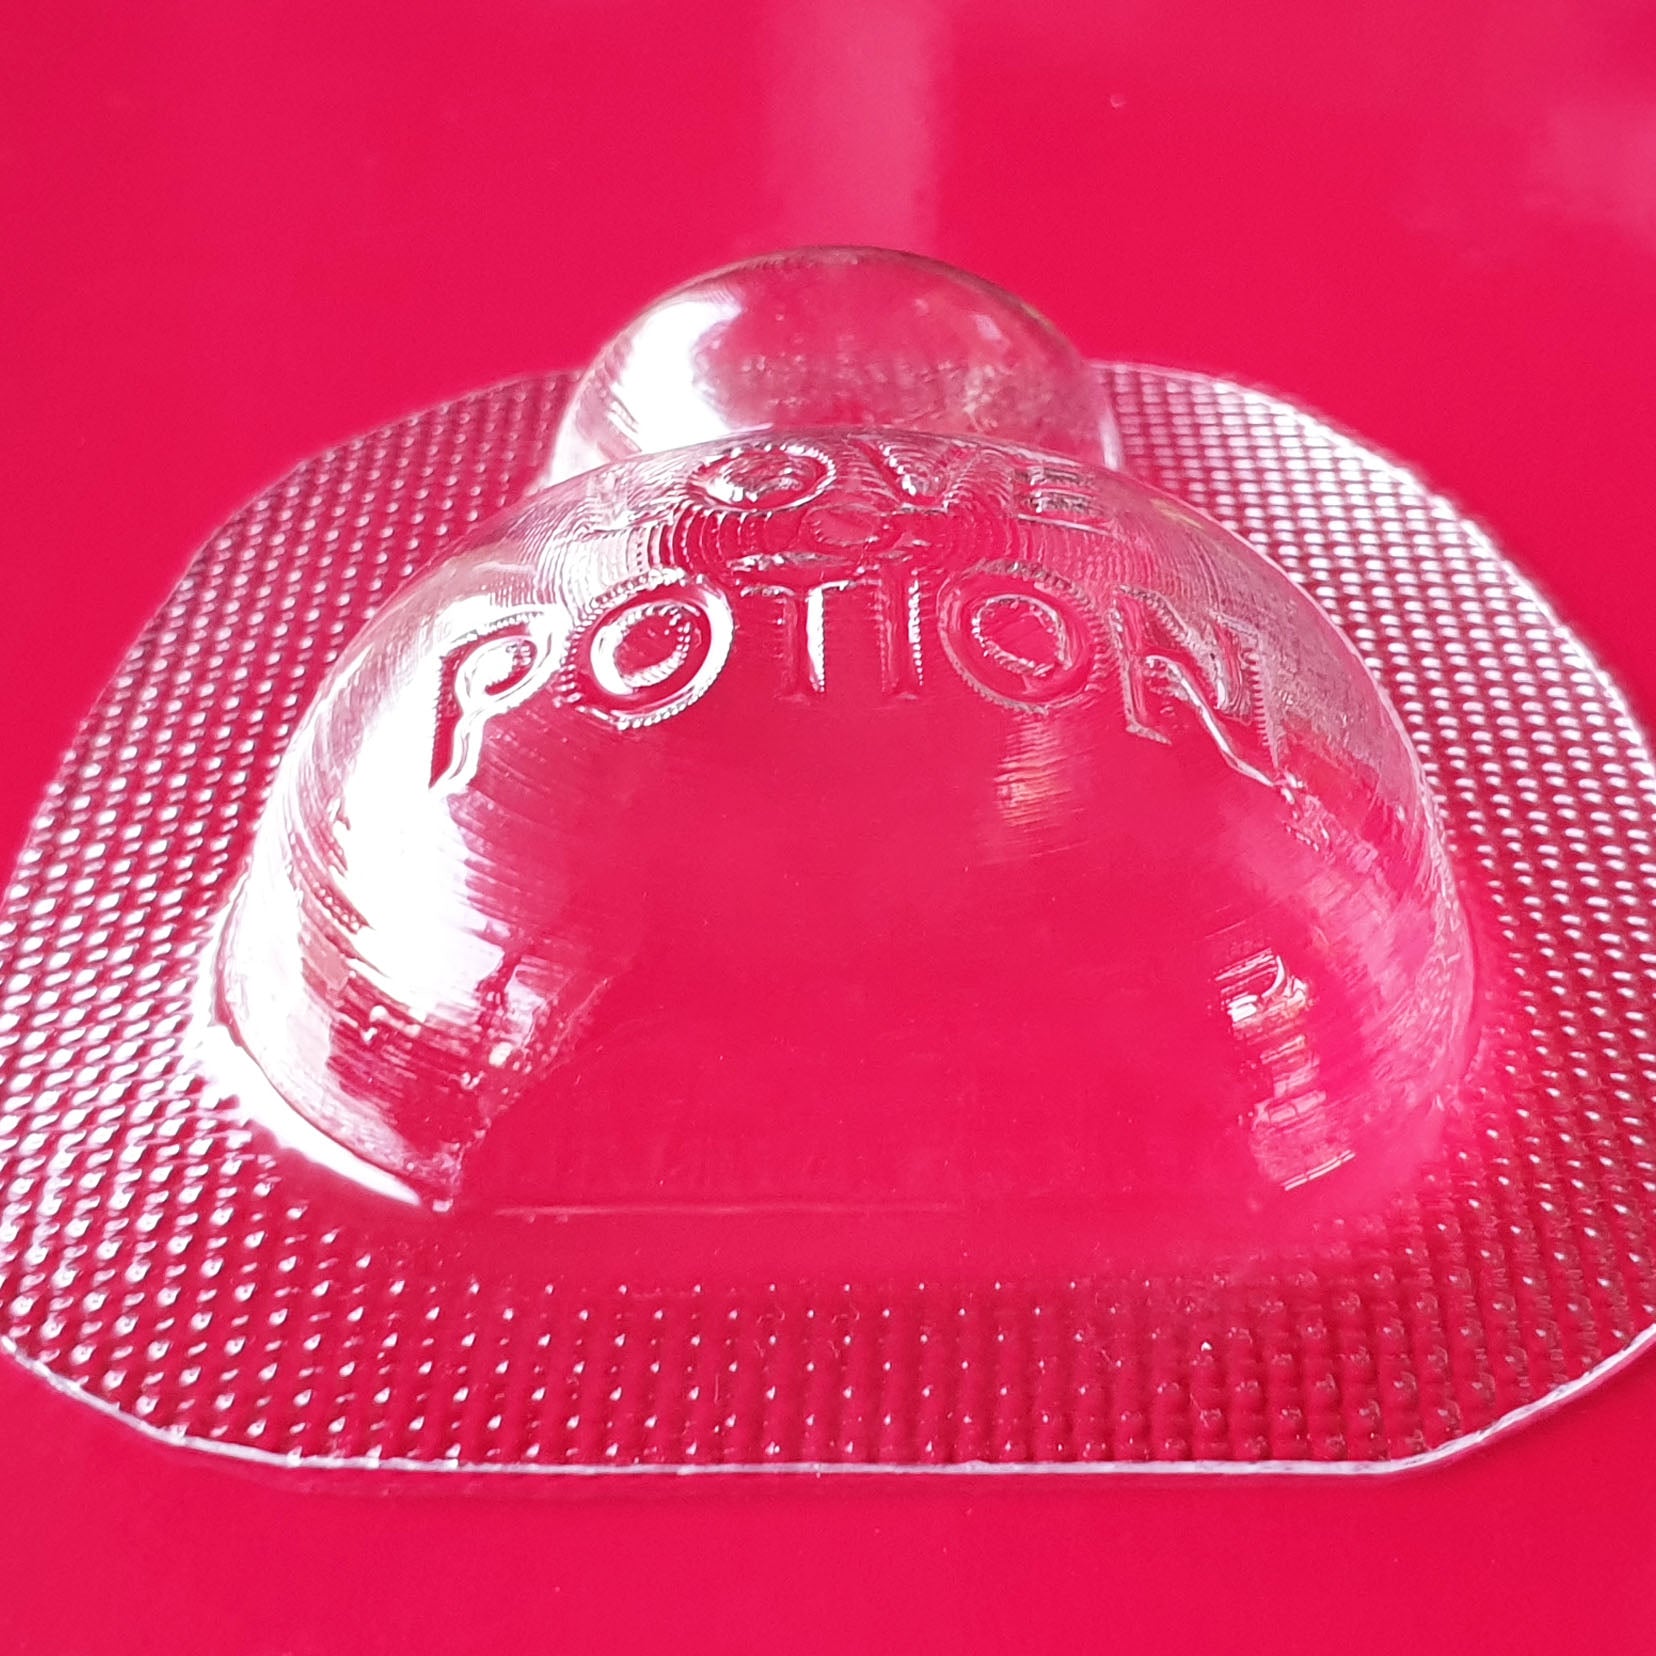 Love Potion Bath Bomb Mould by Truly Personal